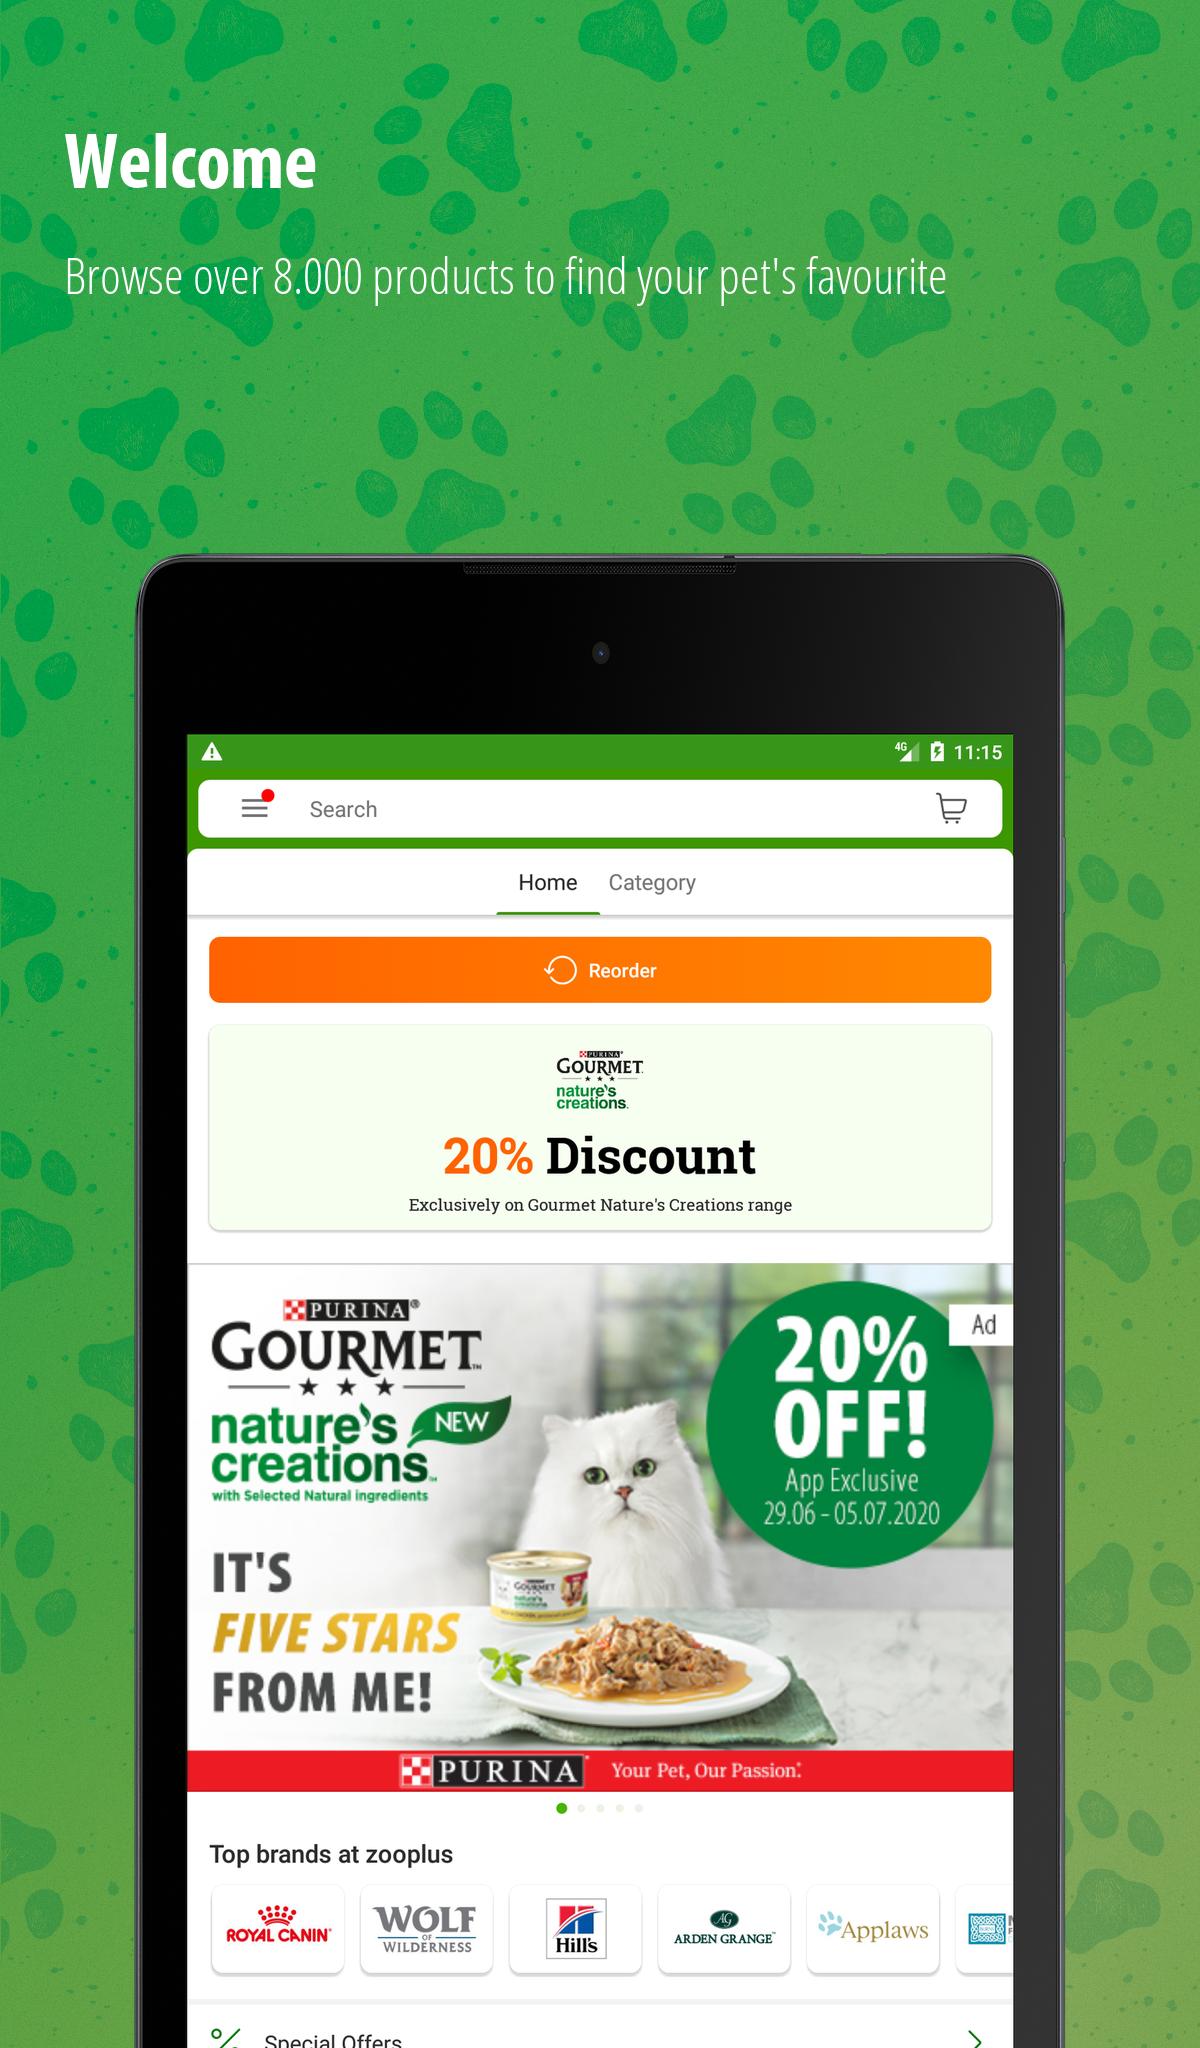 zooplus for Android - APK Download